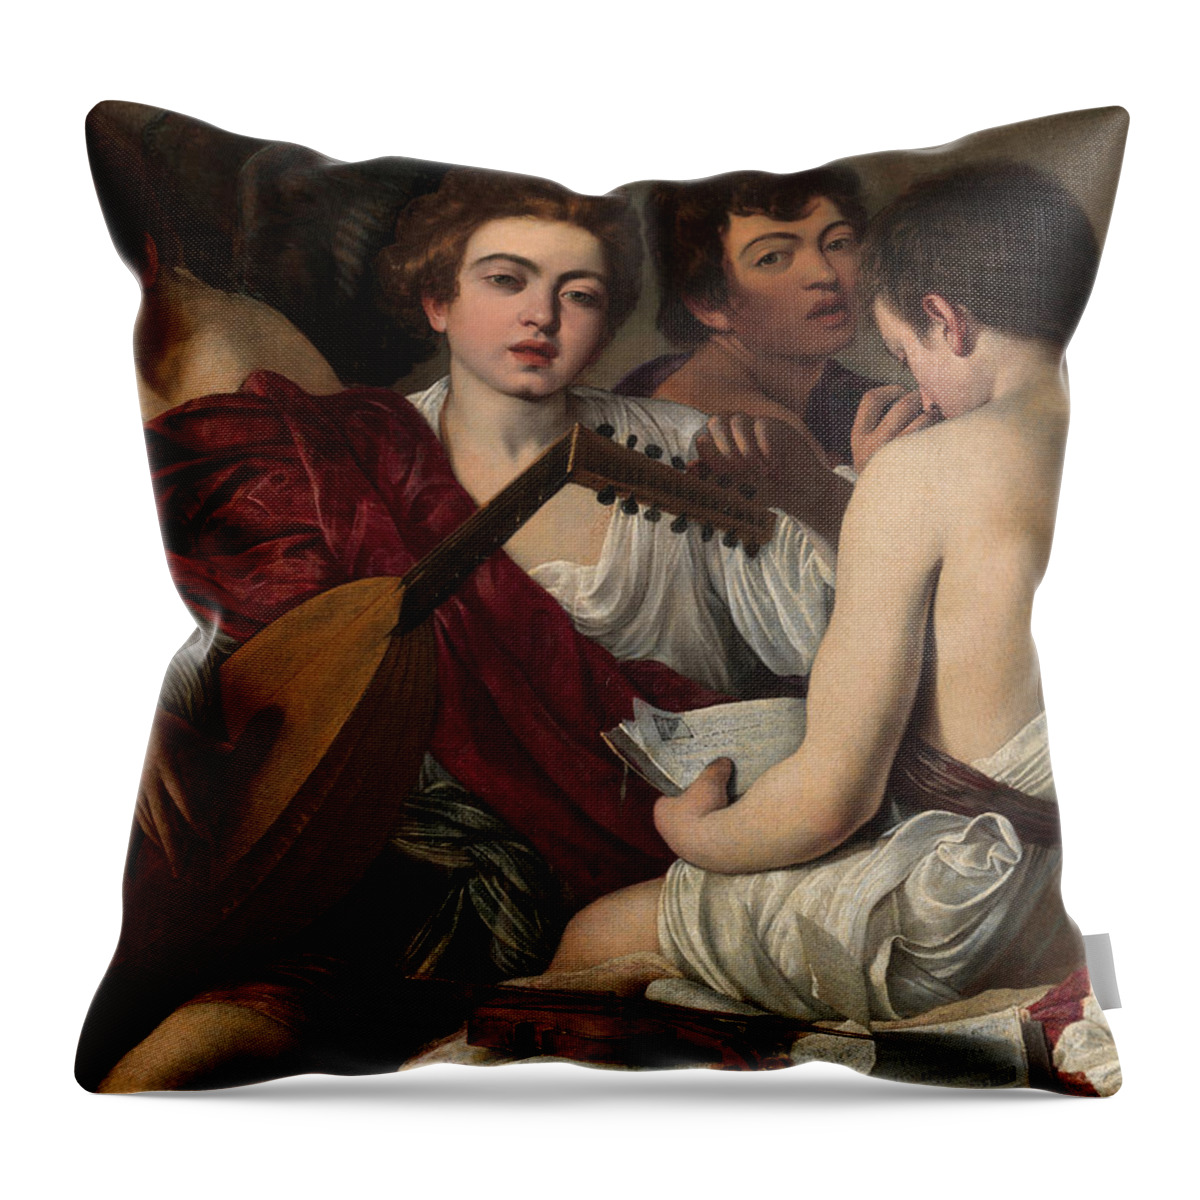 The Musicians Throw Pillow featuring the painting The Musicians by Caravaggio